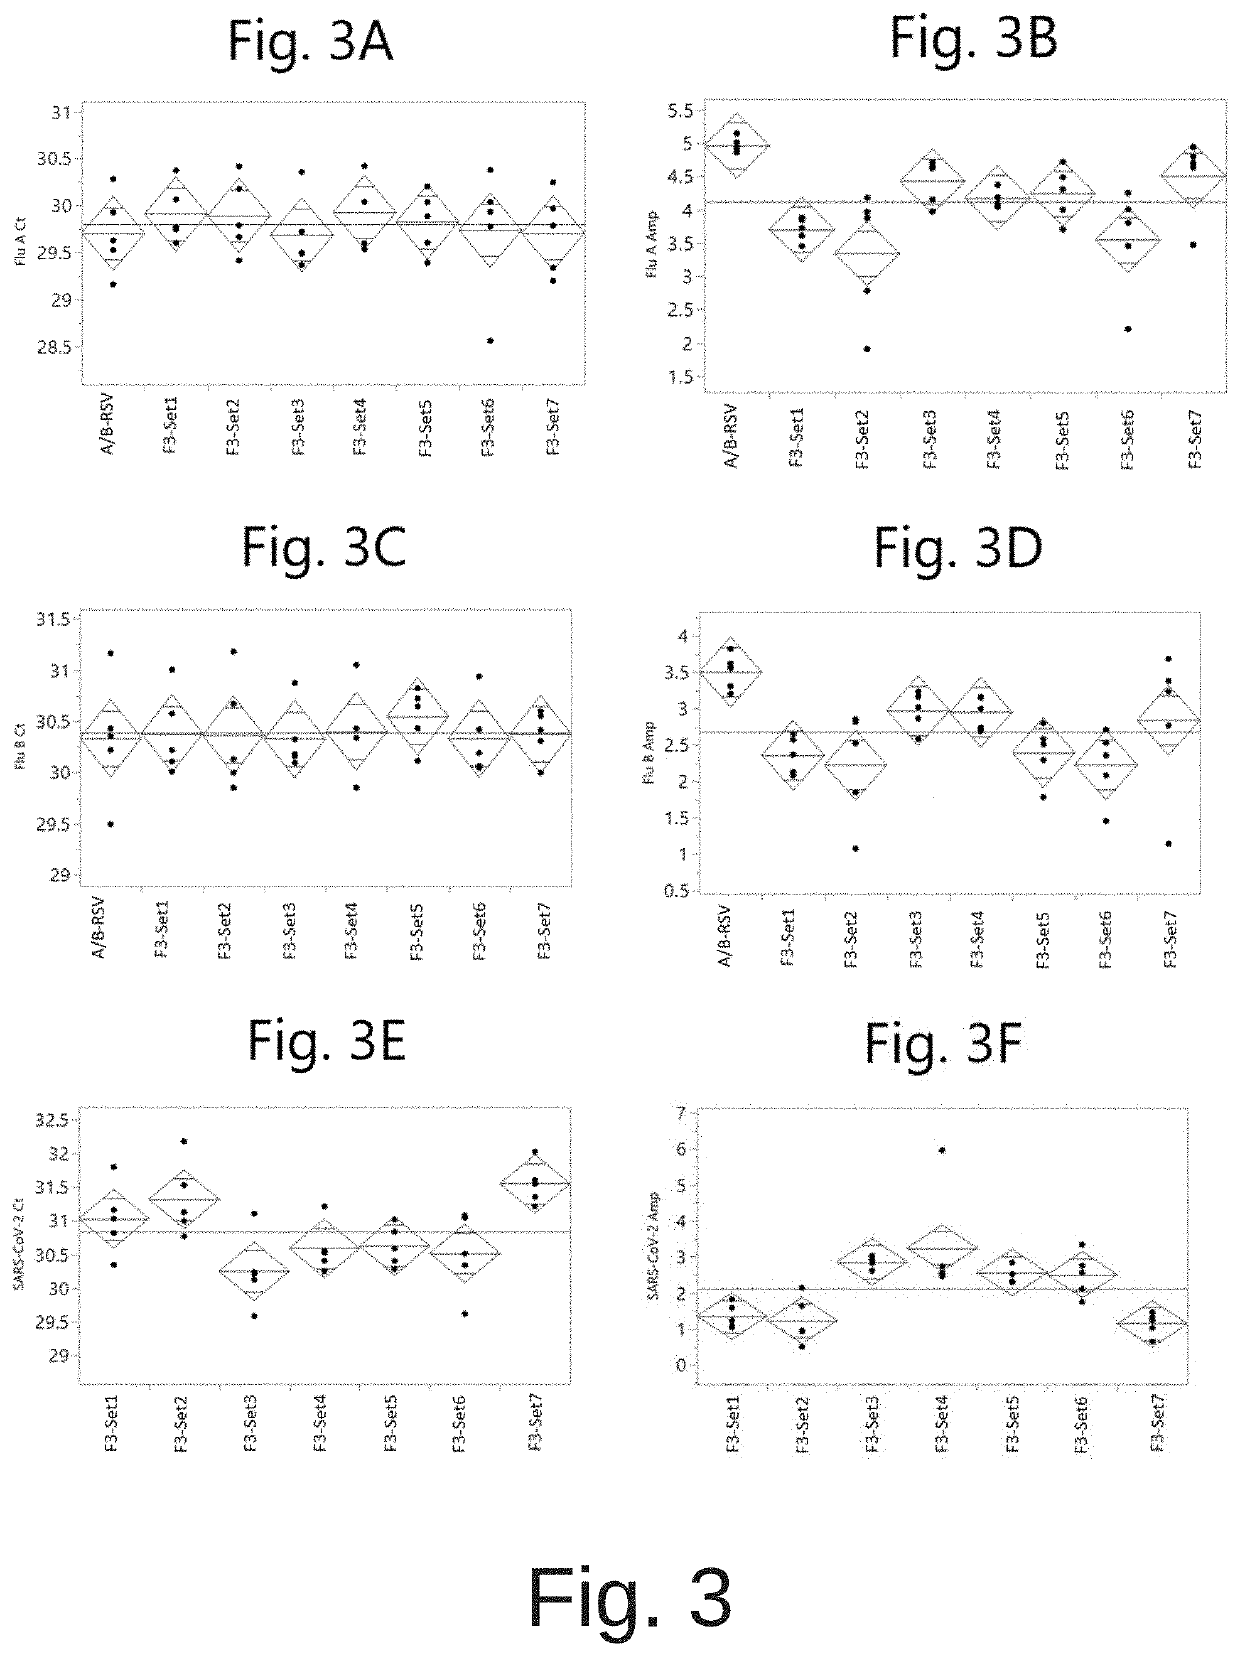 COMPOSITIONS AND METHODS FOR THE SIMULTANEOUS DETECTION OF INFLUENZA A, INFLUENZA B, AND SEVERE ACUTE RESPIRATORY SYNDROME CORONAVIRUS 2 (SARS-CoV-2)